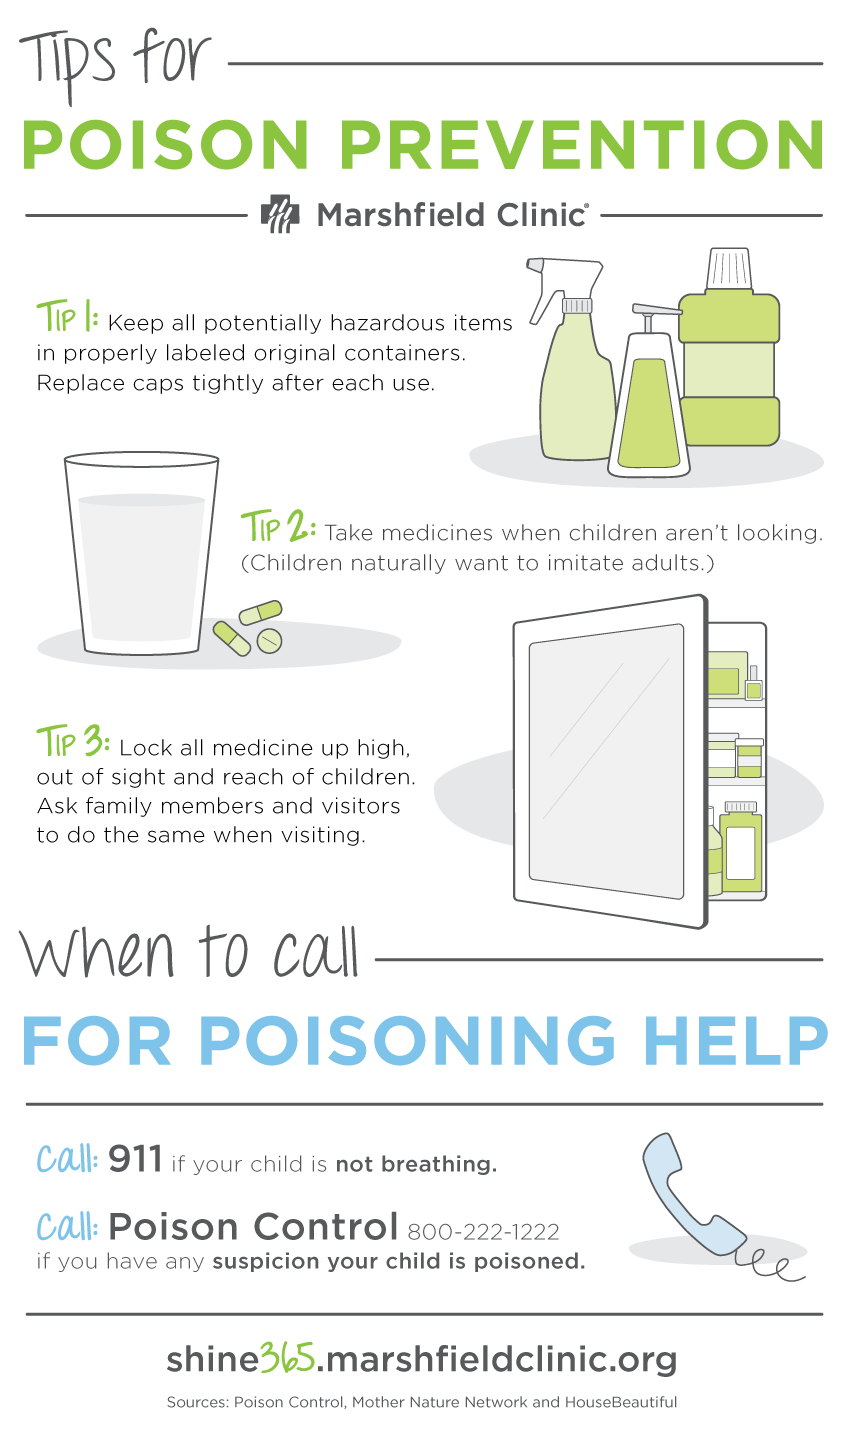 Household poisoning and prevention tips